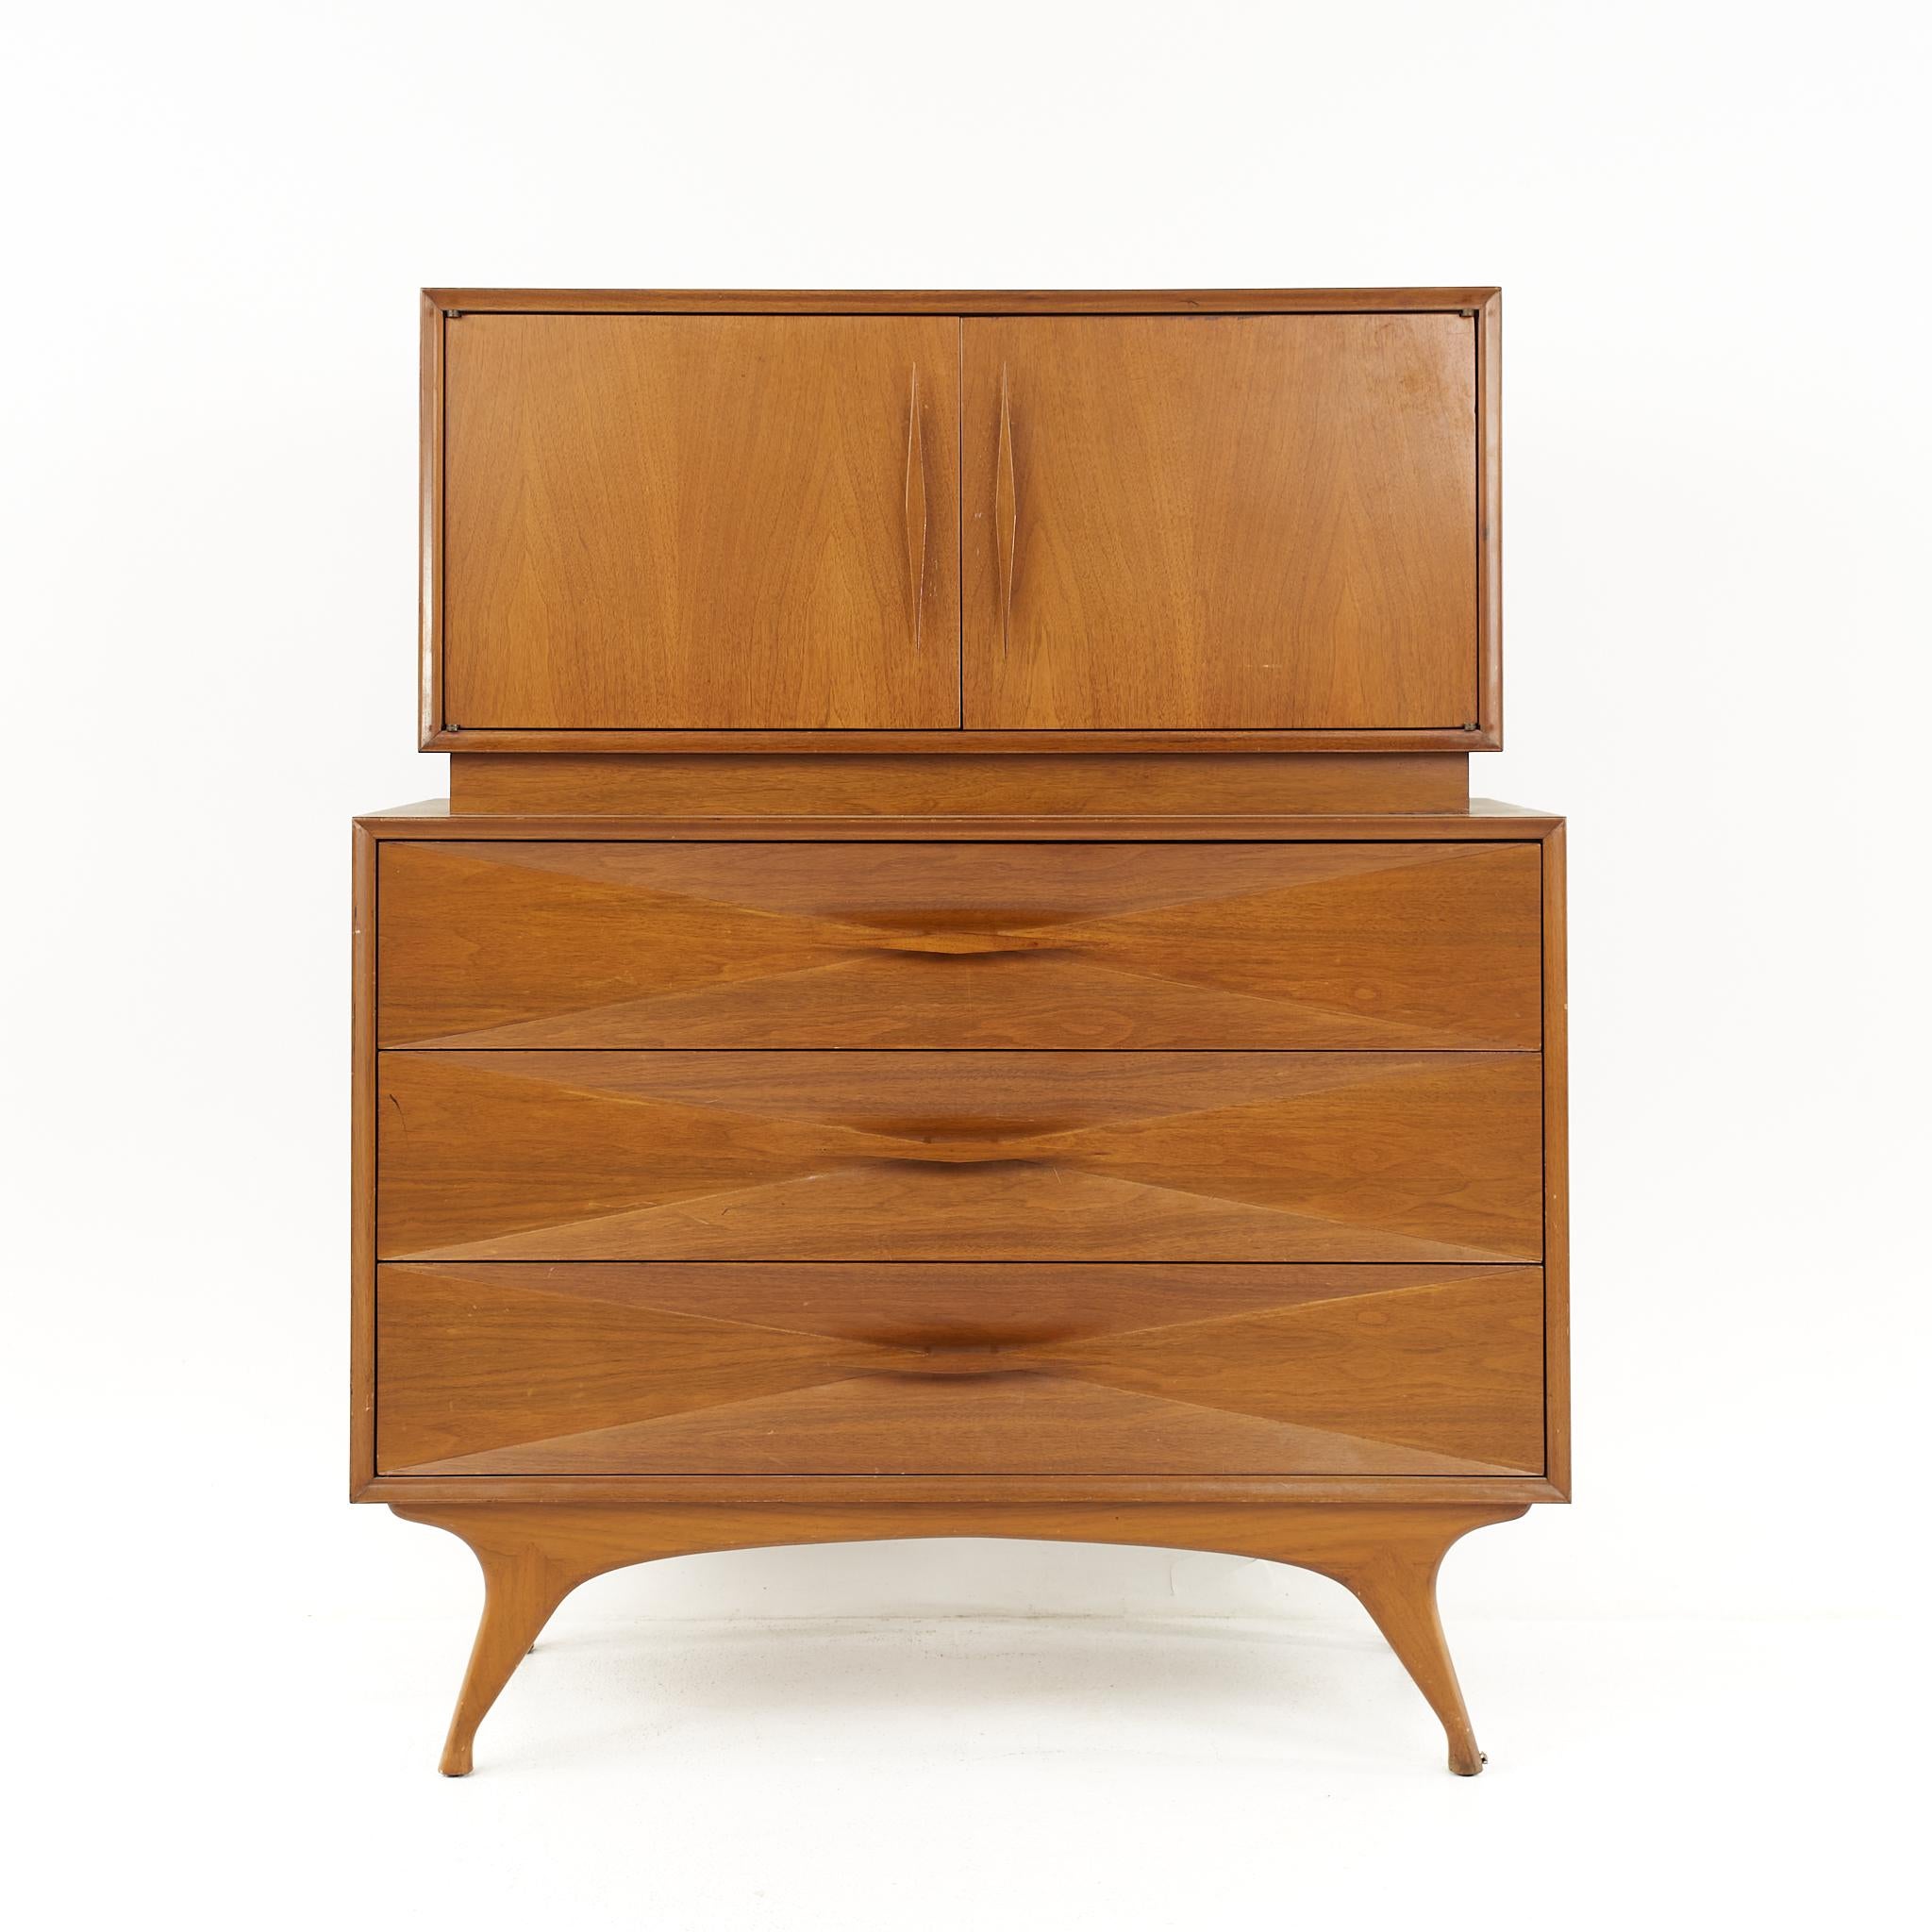 Albert Parvin Style Roma Mid Century Sculpted Walnut Highboy Dresser

The dresser measures: 40 wide x 19 deep x 49 inches high

All pieces of furniture can be had in what we call restored vintage condition. That means the piece is restored upon